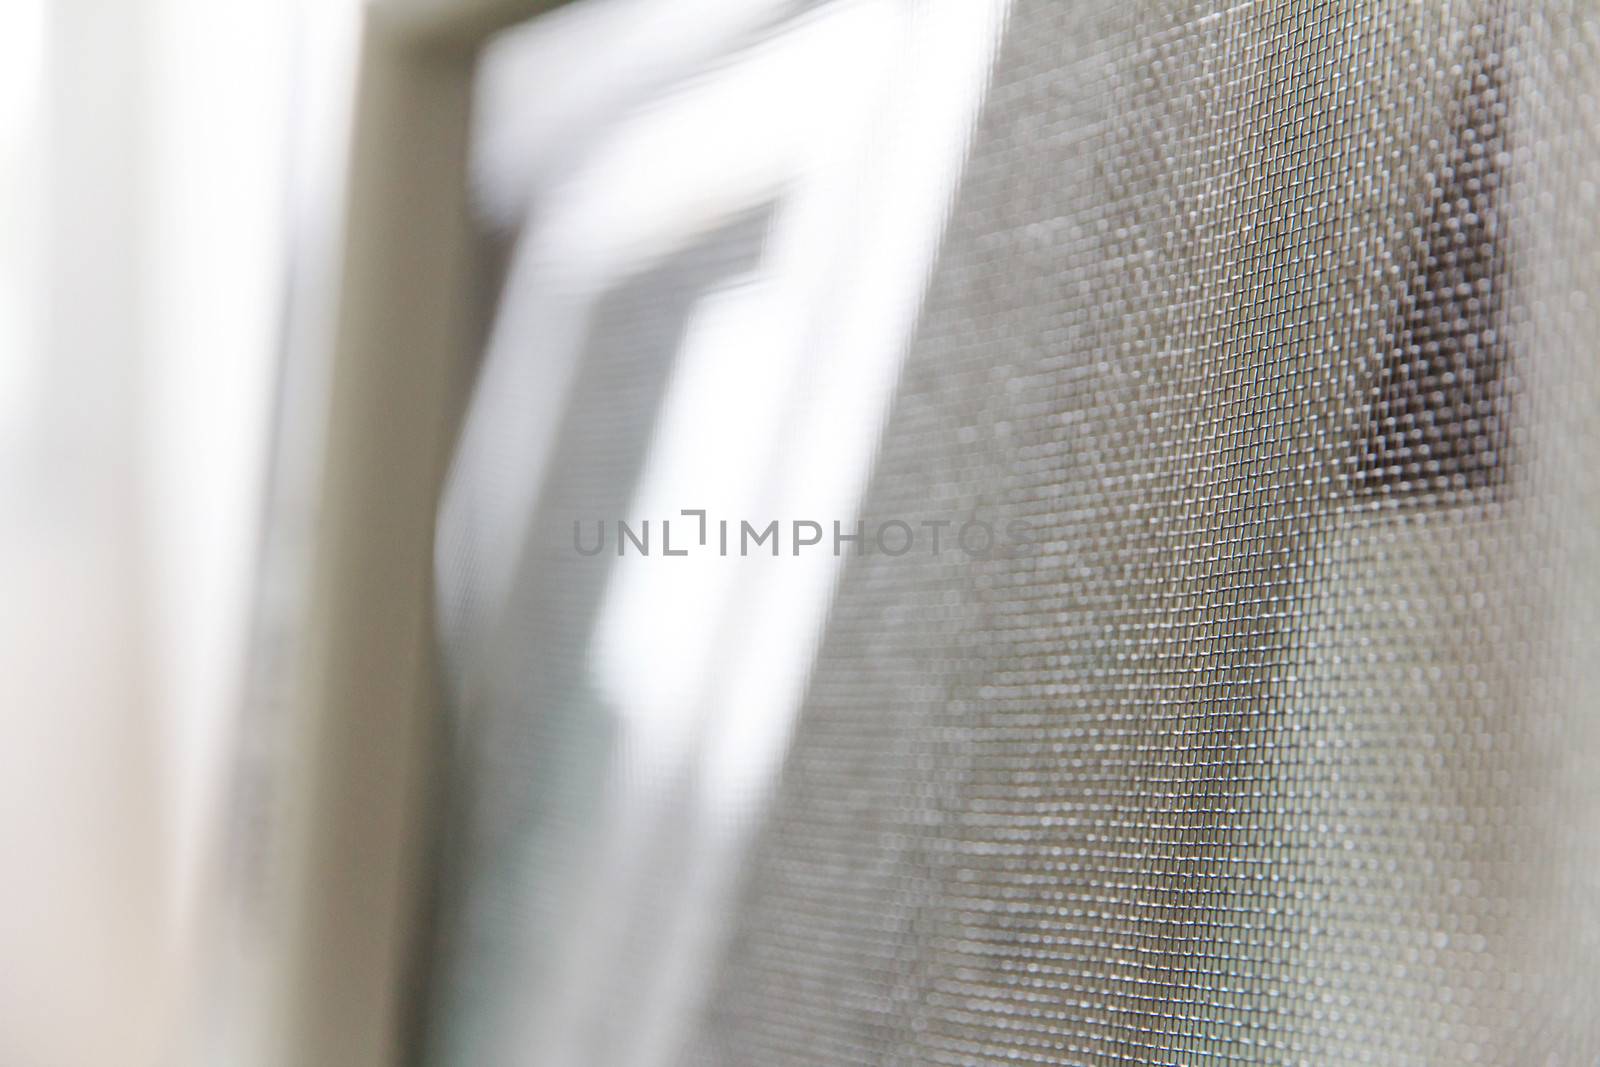 close up of mosquito net and window background